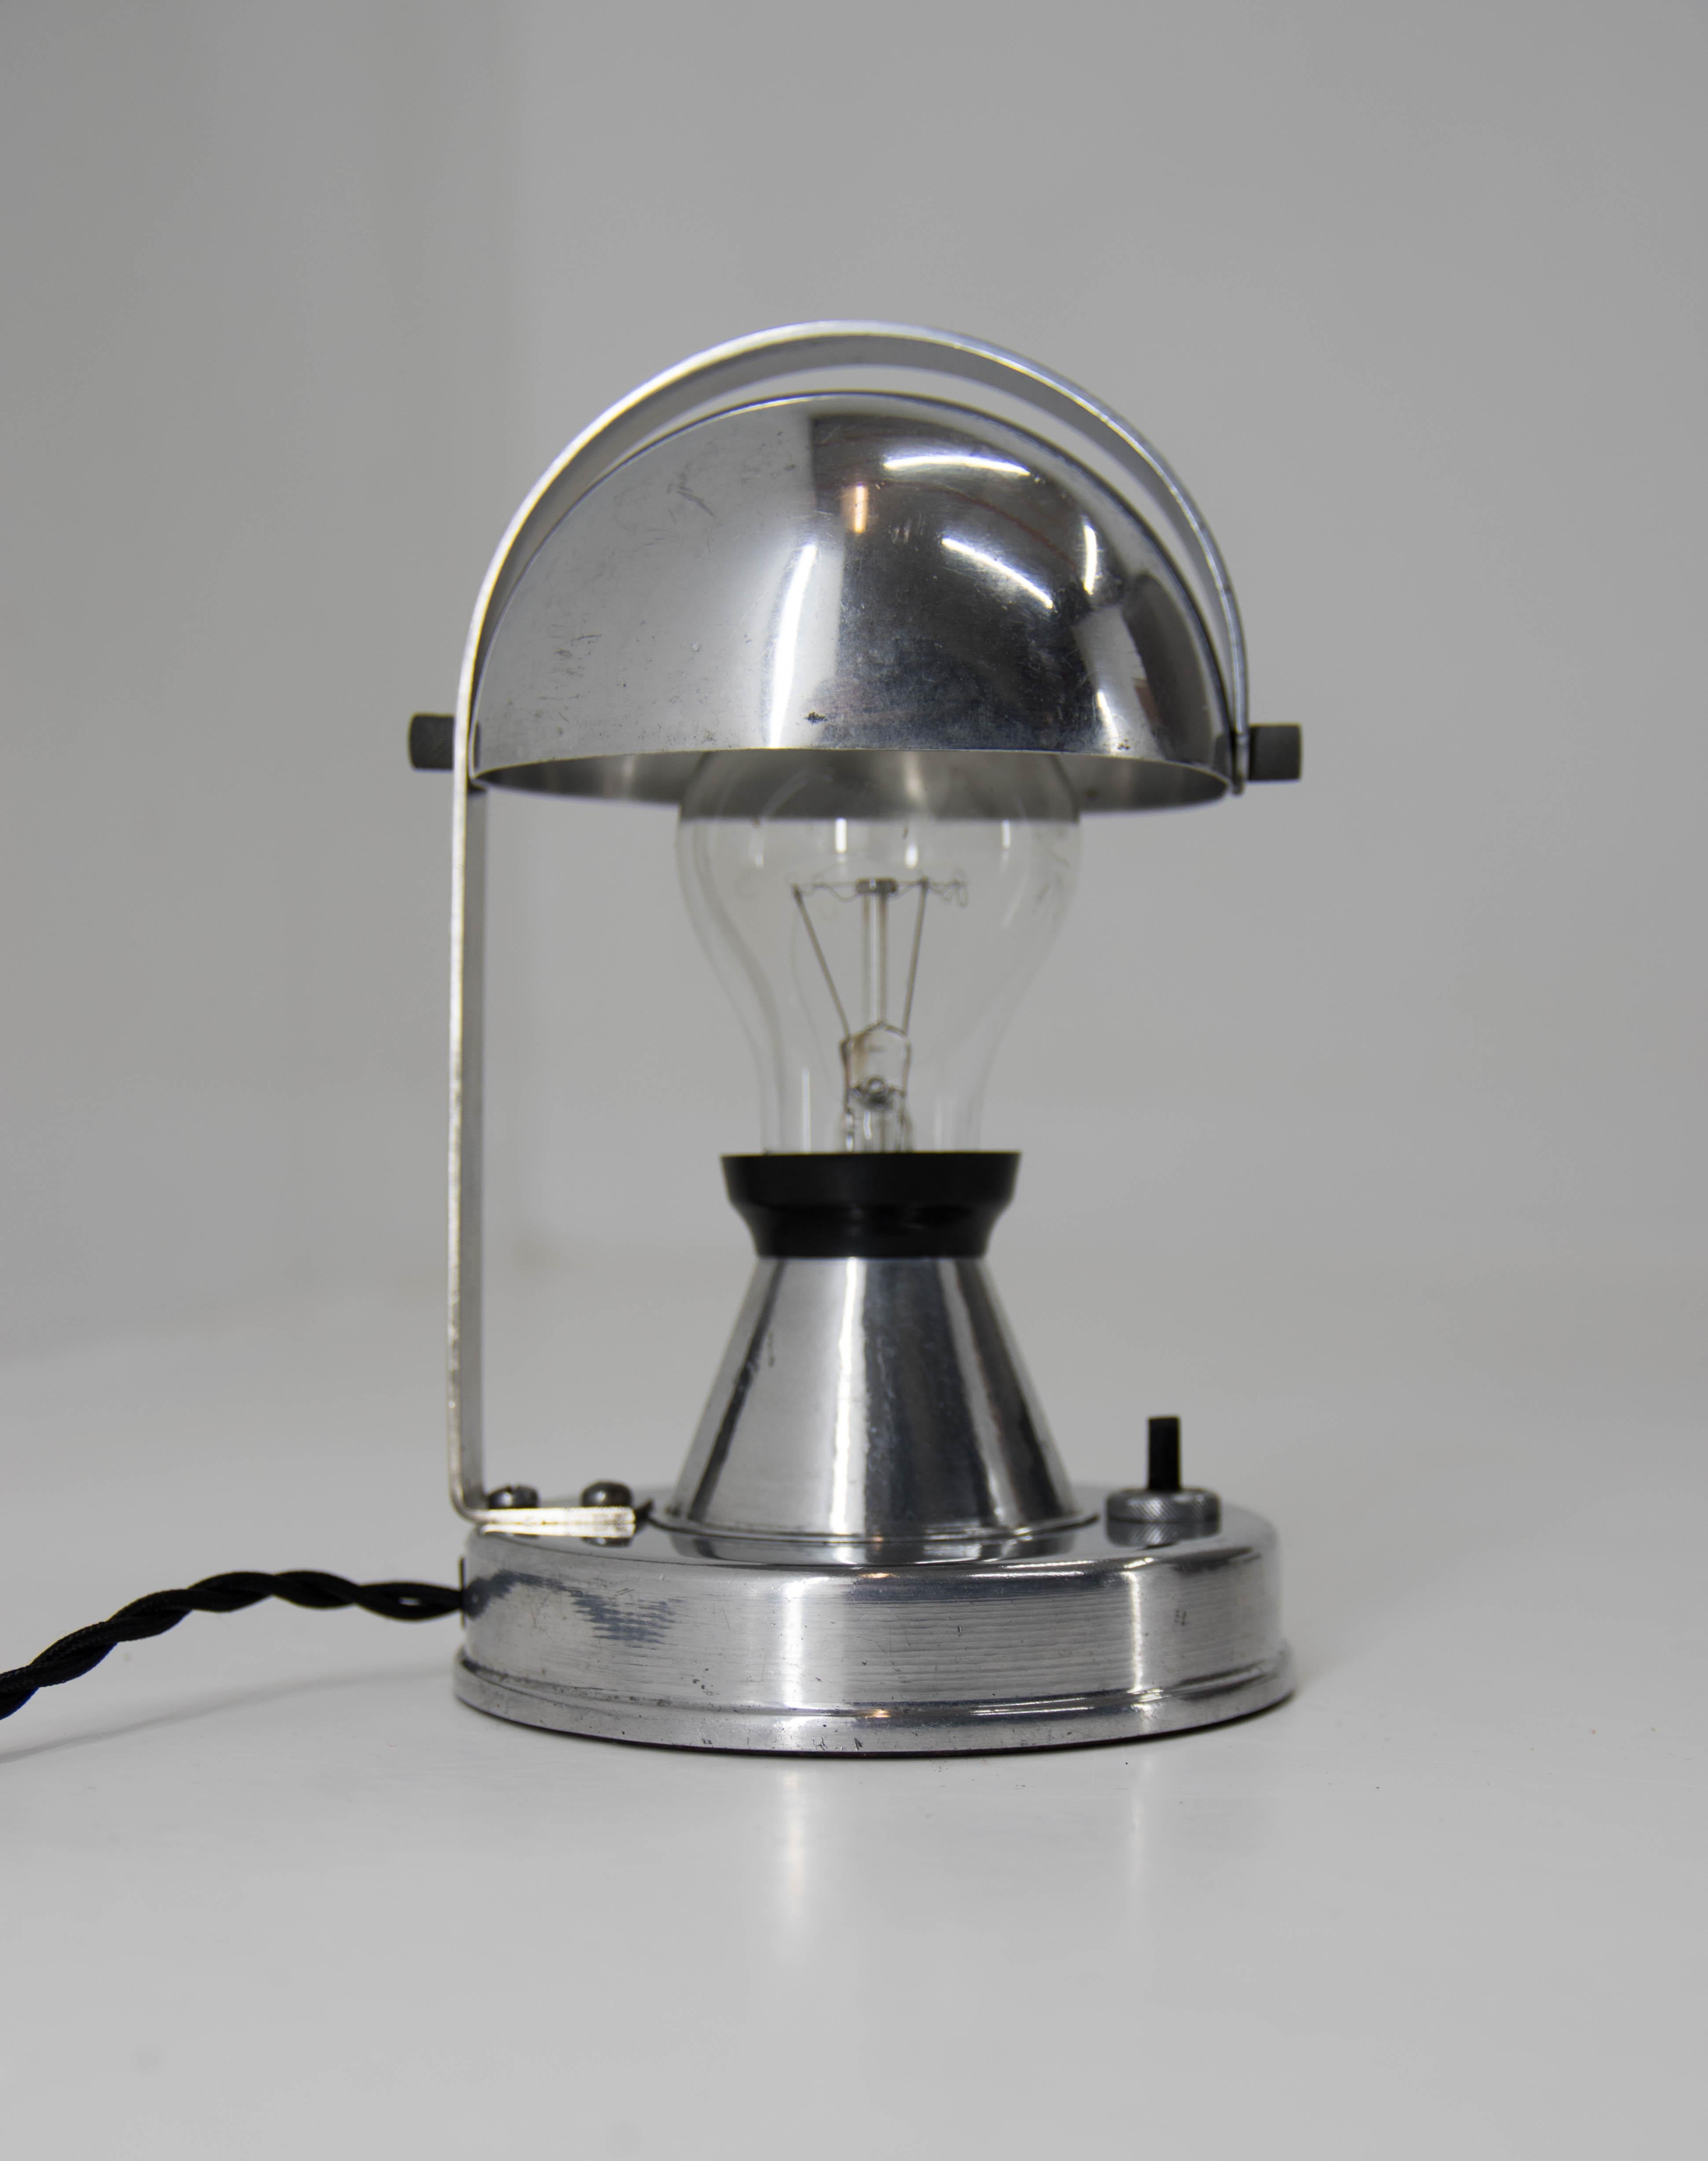 Beautiful rare table lamp with flexible shades. Designed by Franta Anyz for IAS.
Restored: aluminum polished, rewired - 1x40W, E25-E27 bulb
US plug adapter included.